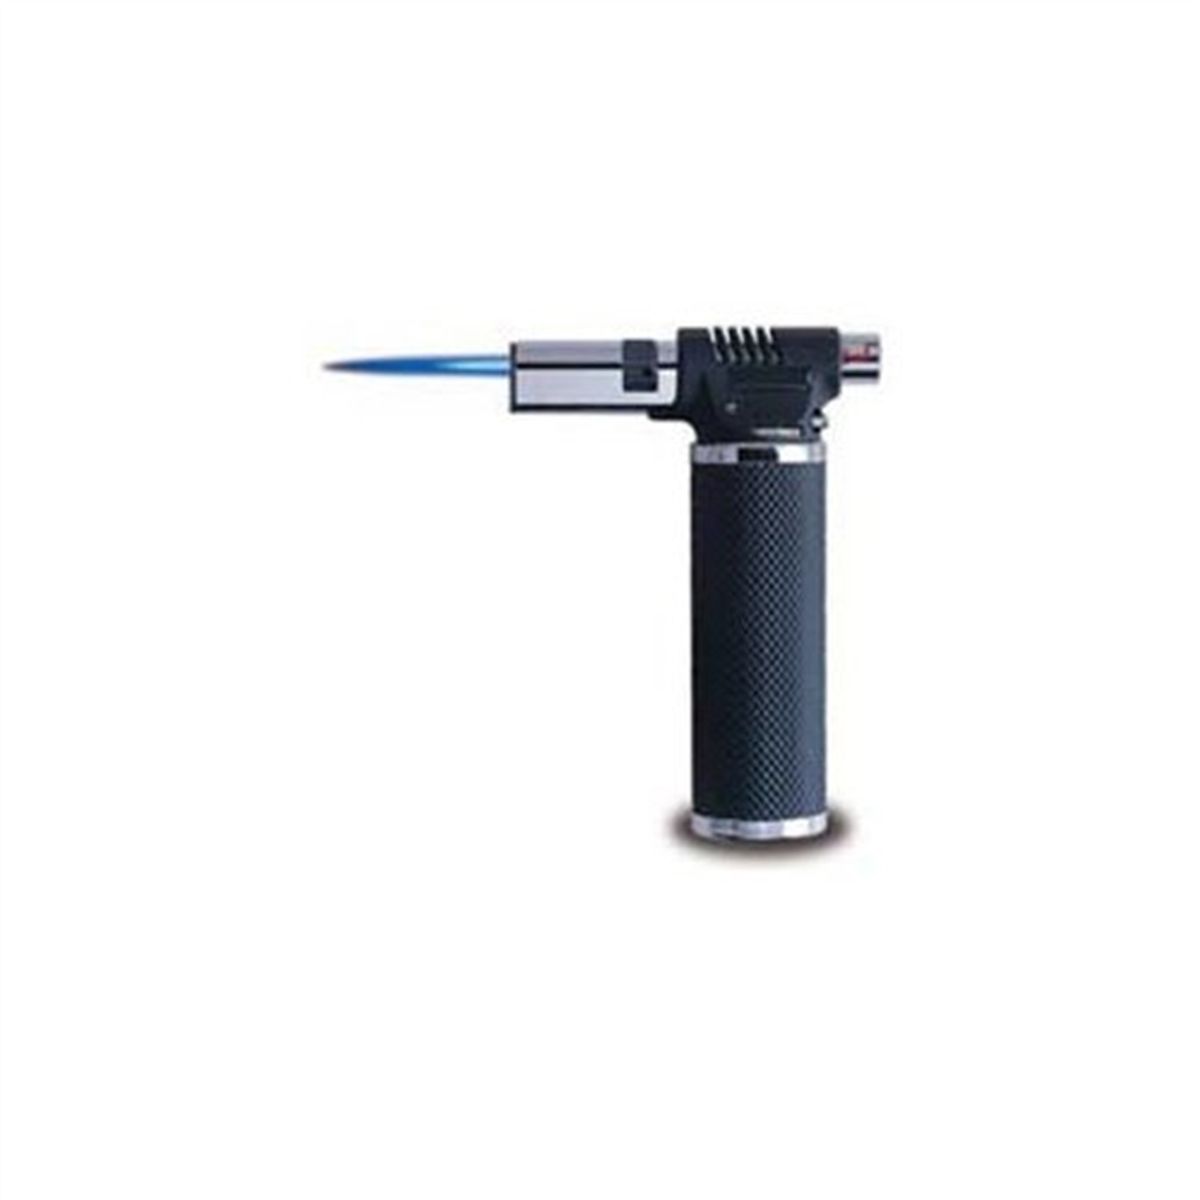 Pro-Torch 220 Micro Table Top Torch